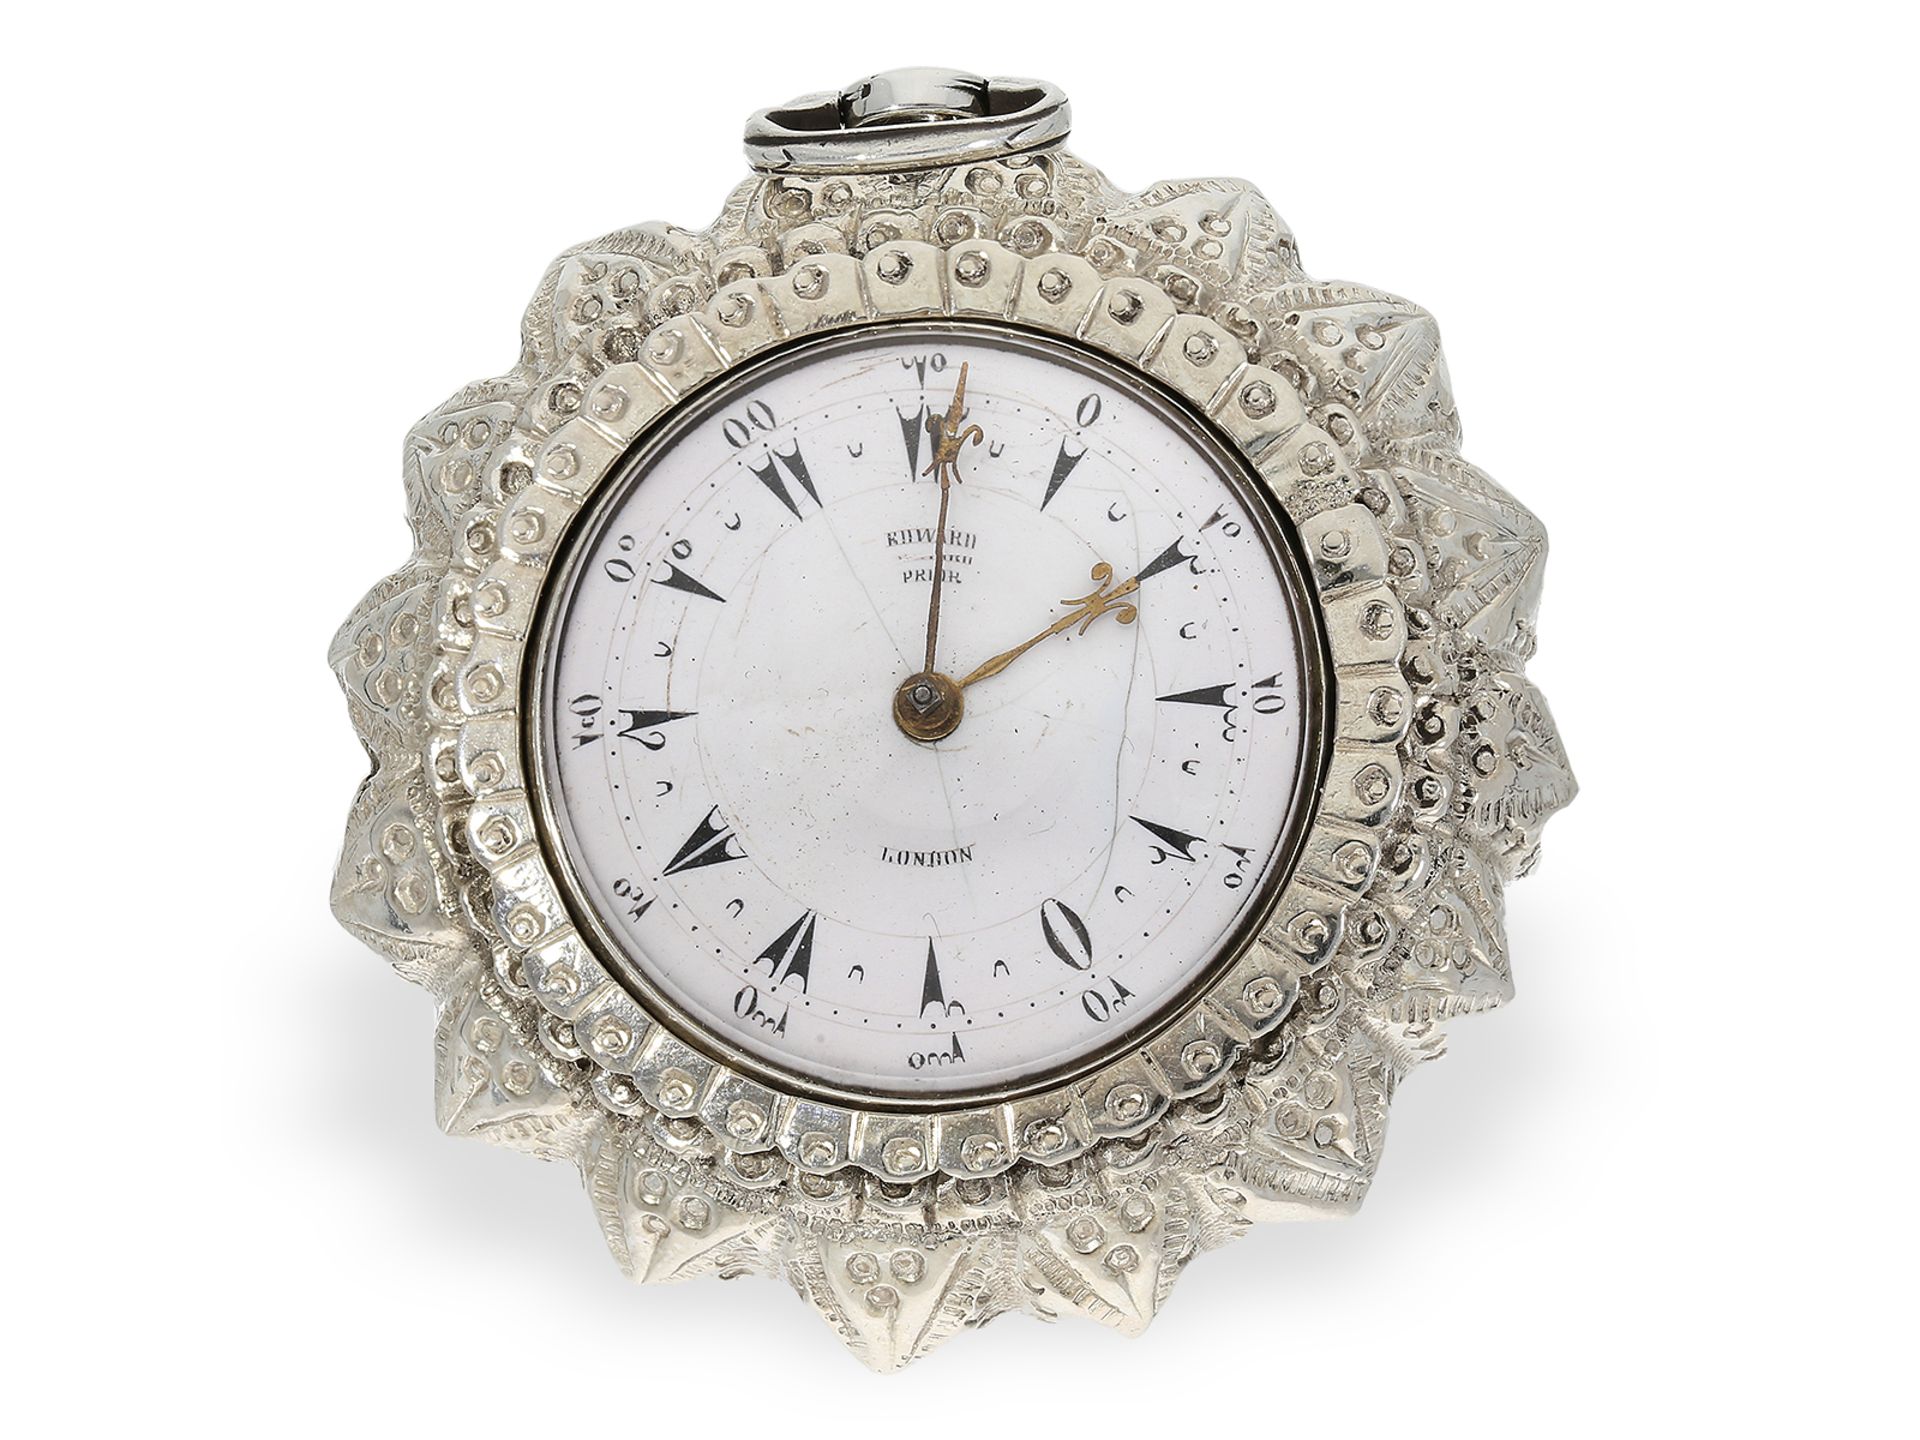 Pocket watch: large silver pocket watch for the Ottoman market with unusual outer case, Edward Prior